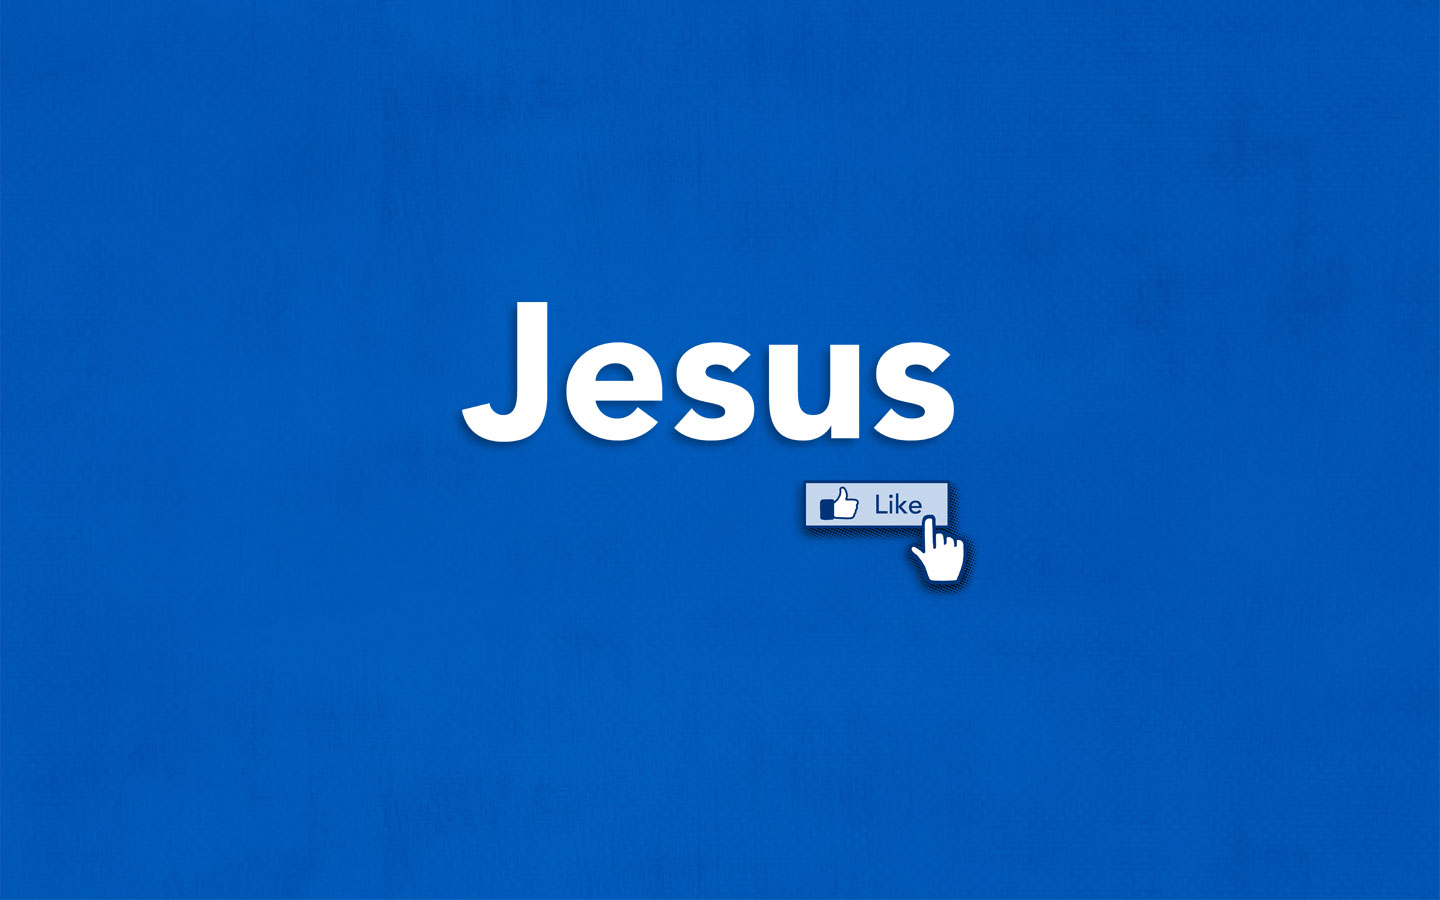 I Like Jesus Wallpaper - Christian Wallpapers and Backgrounds